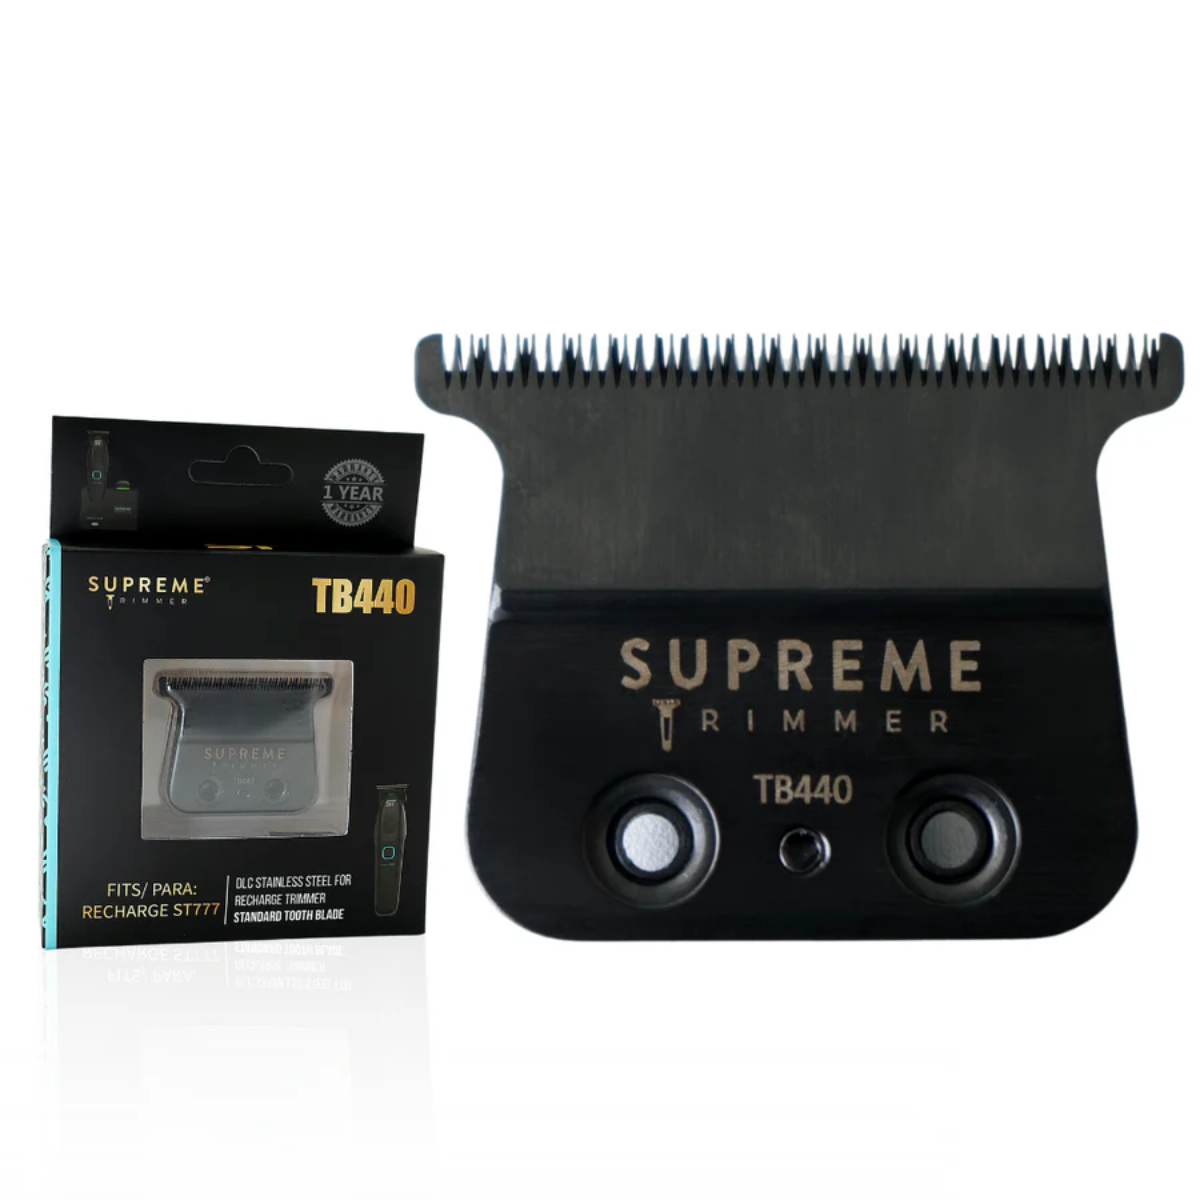 Supreme ST Recharge Replacement Blade - Standard Tooth